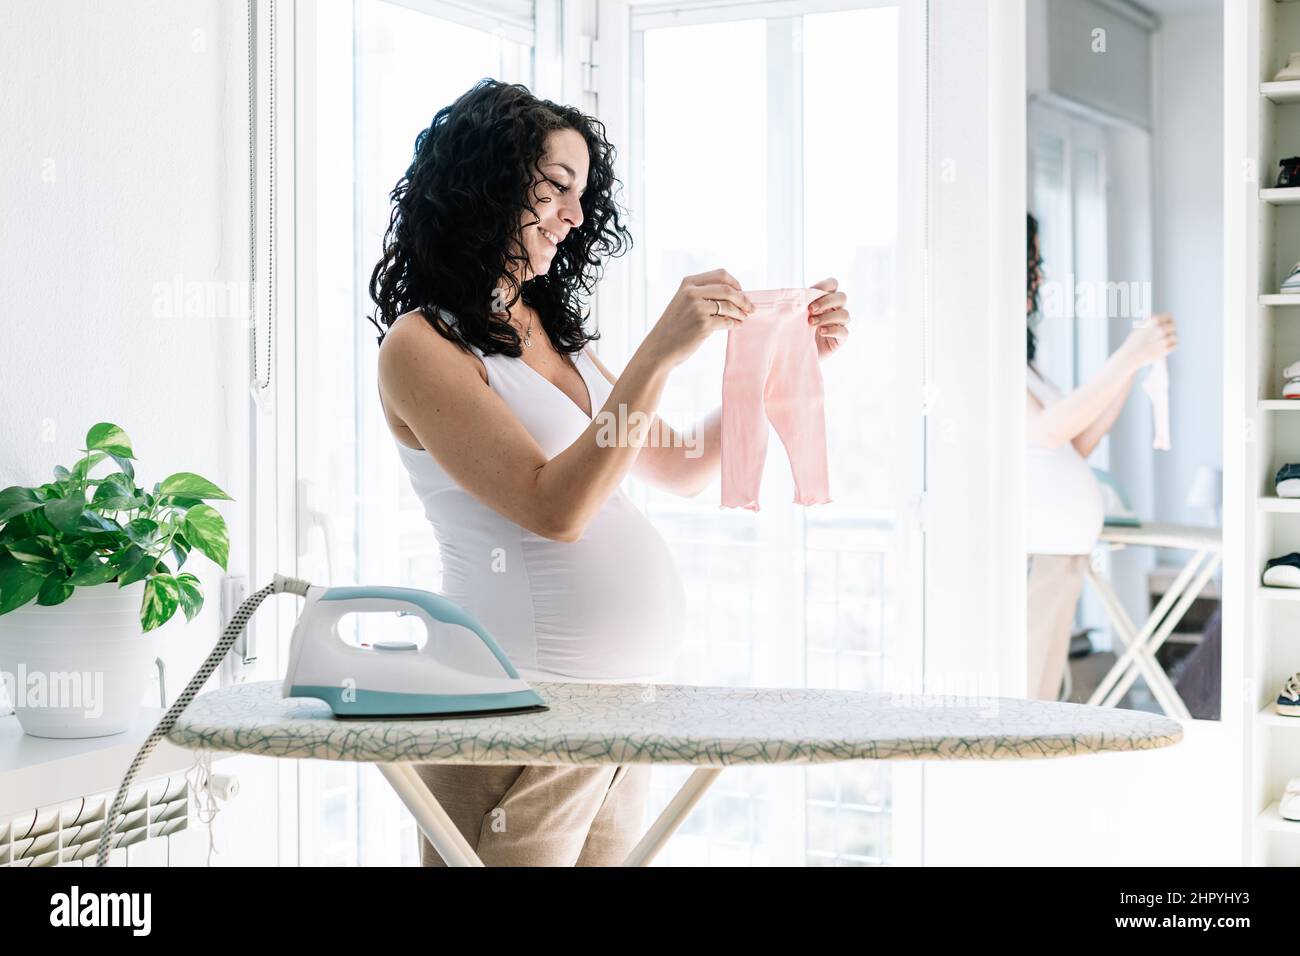 young pretty pregnant woman with curly hair irons the clothes of her future baby, preparing the room for the newborn Stock Photo